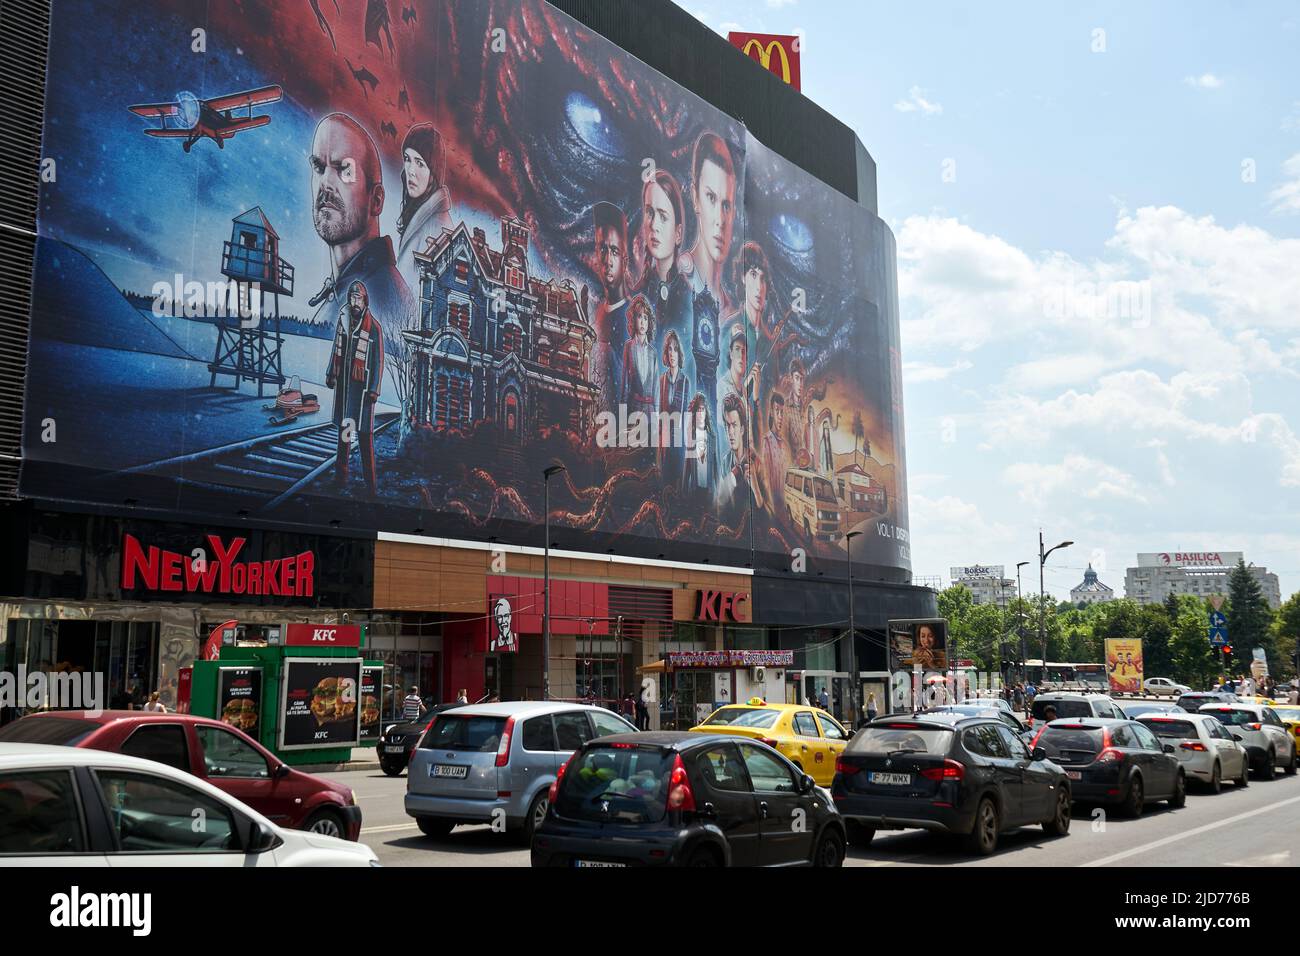 Bucharest, Romania - June 17, 2022: Extra large banner advertising Stranger Things seson 4 is displayed on the Unirea Shopping Center, in downtown Buc Stock Photo